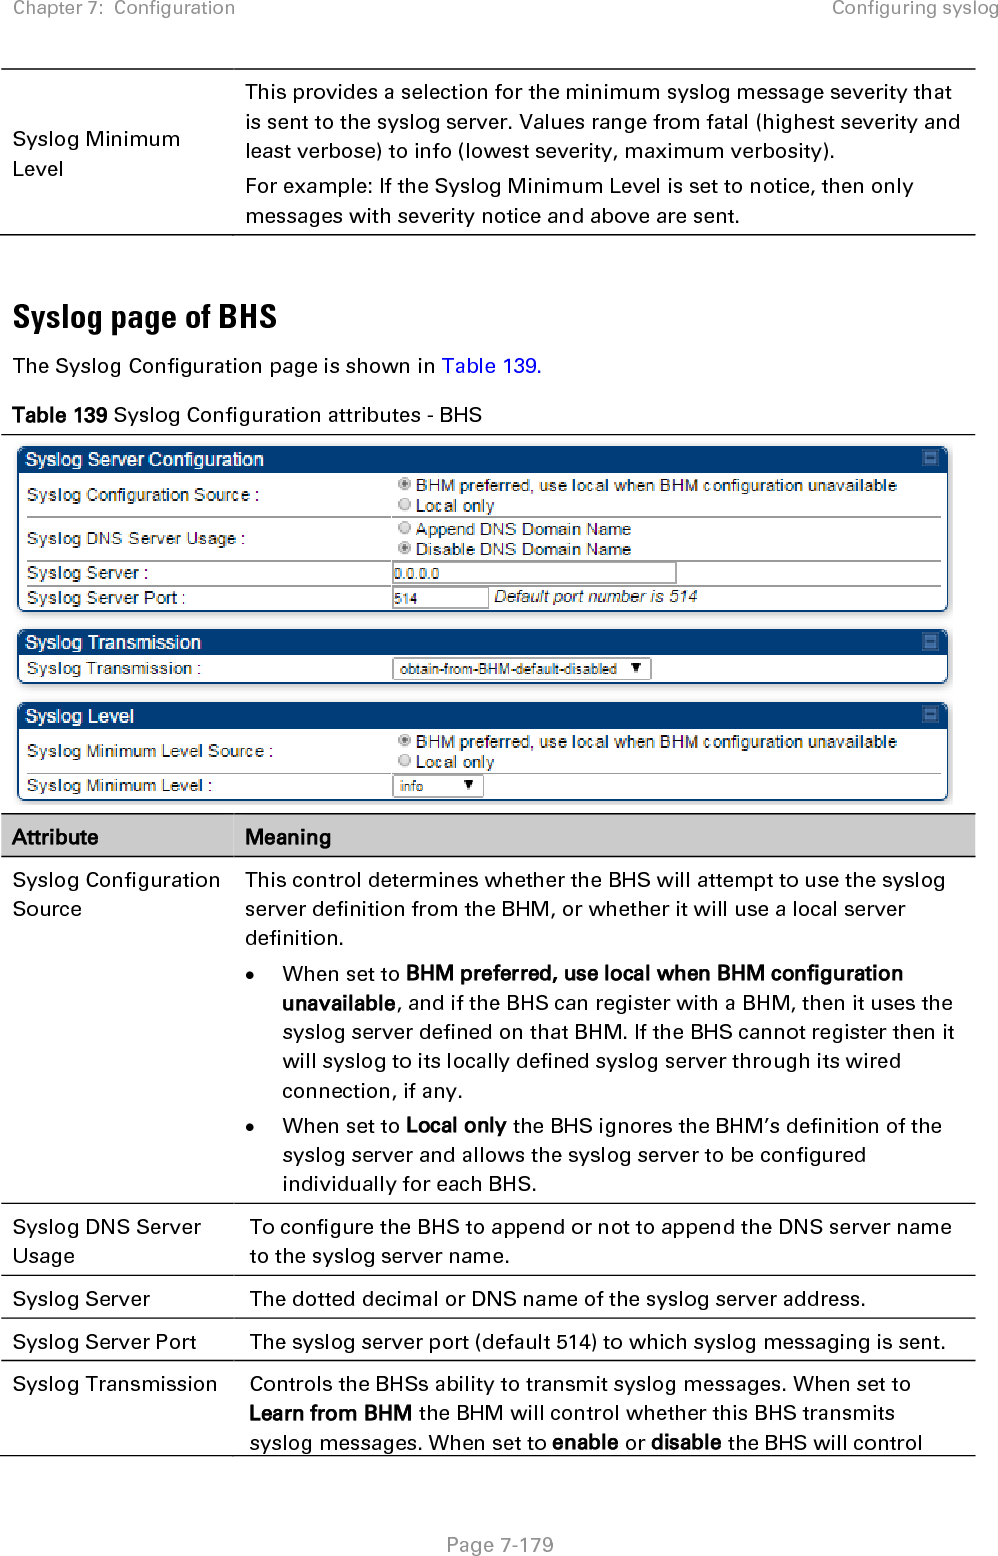 Chapter 7:  Configuration Configuring syslog   Page 7-180 whether it sends syslog messages. This allows an operator to override the BHM settings for individual BHSs in a sector. Syslog Minimum Level Source  This control determines whether the BHS attempts to use the minimum syslog level defined by the BHM, or whether it uses a local defined value using the Syslog Minimum Level parameter. • When set to BHM preferred, use local when BHM configuration unavailable, and if the BHS can register with a BHM, then it uses the Syslog Minimum Level defined on that BHM. If the BHS cannot register then it uses its own Syslog Minimum Level setting. When set to Local only the BHS will always use its own Syslog Minimum Level setting and ignores the BHM’s setting. Syslog Minimum Level  This provides a selection for the minimum syslog message severity that is sent to the syslog server. Values range from fatal (highest severity and least verbose) to info (lowest severity, maximum verbosity). For example: If the Syslog Minimum Level is set to notice, then only messages with severity notice and above are sent.  